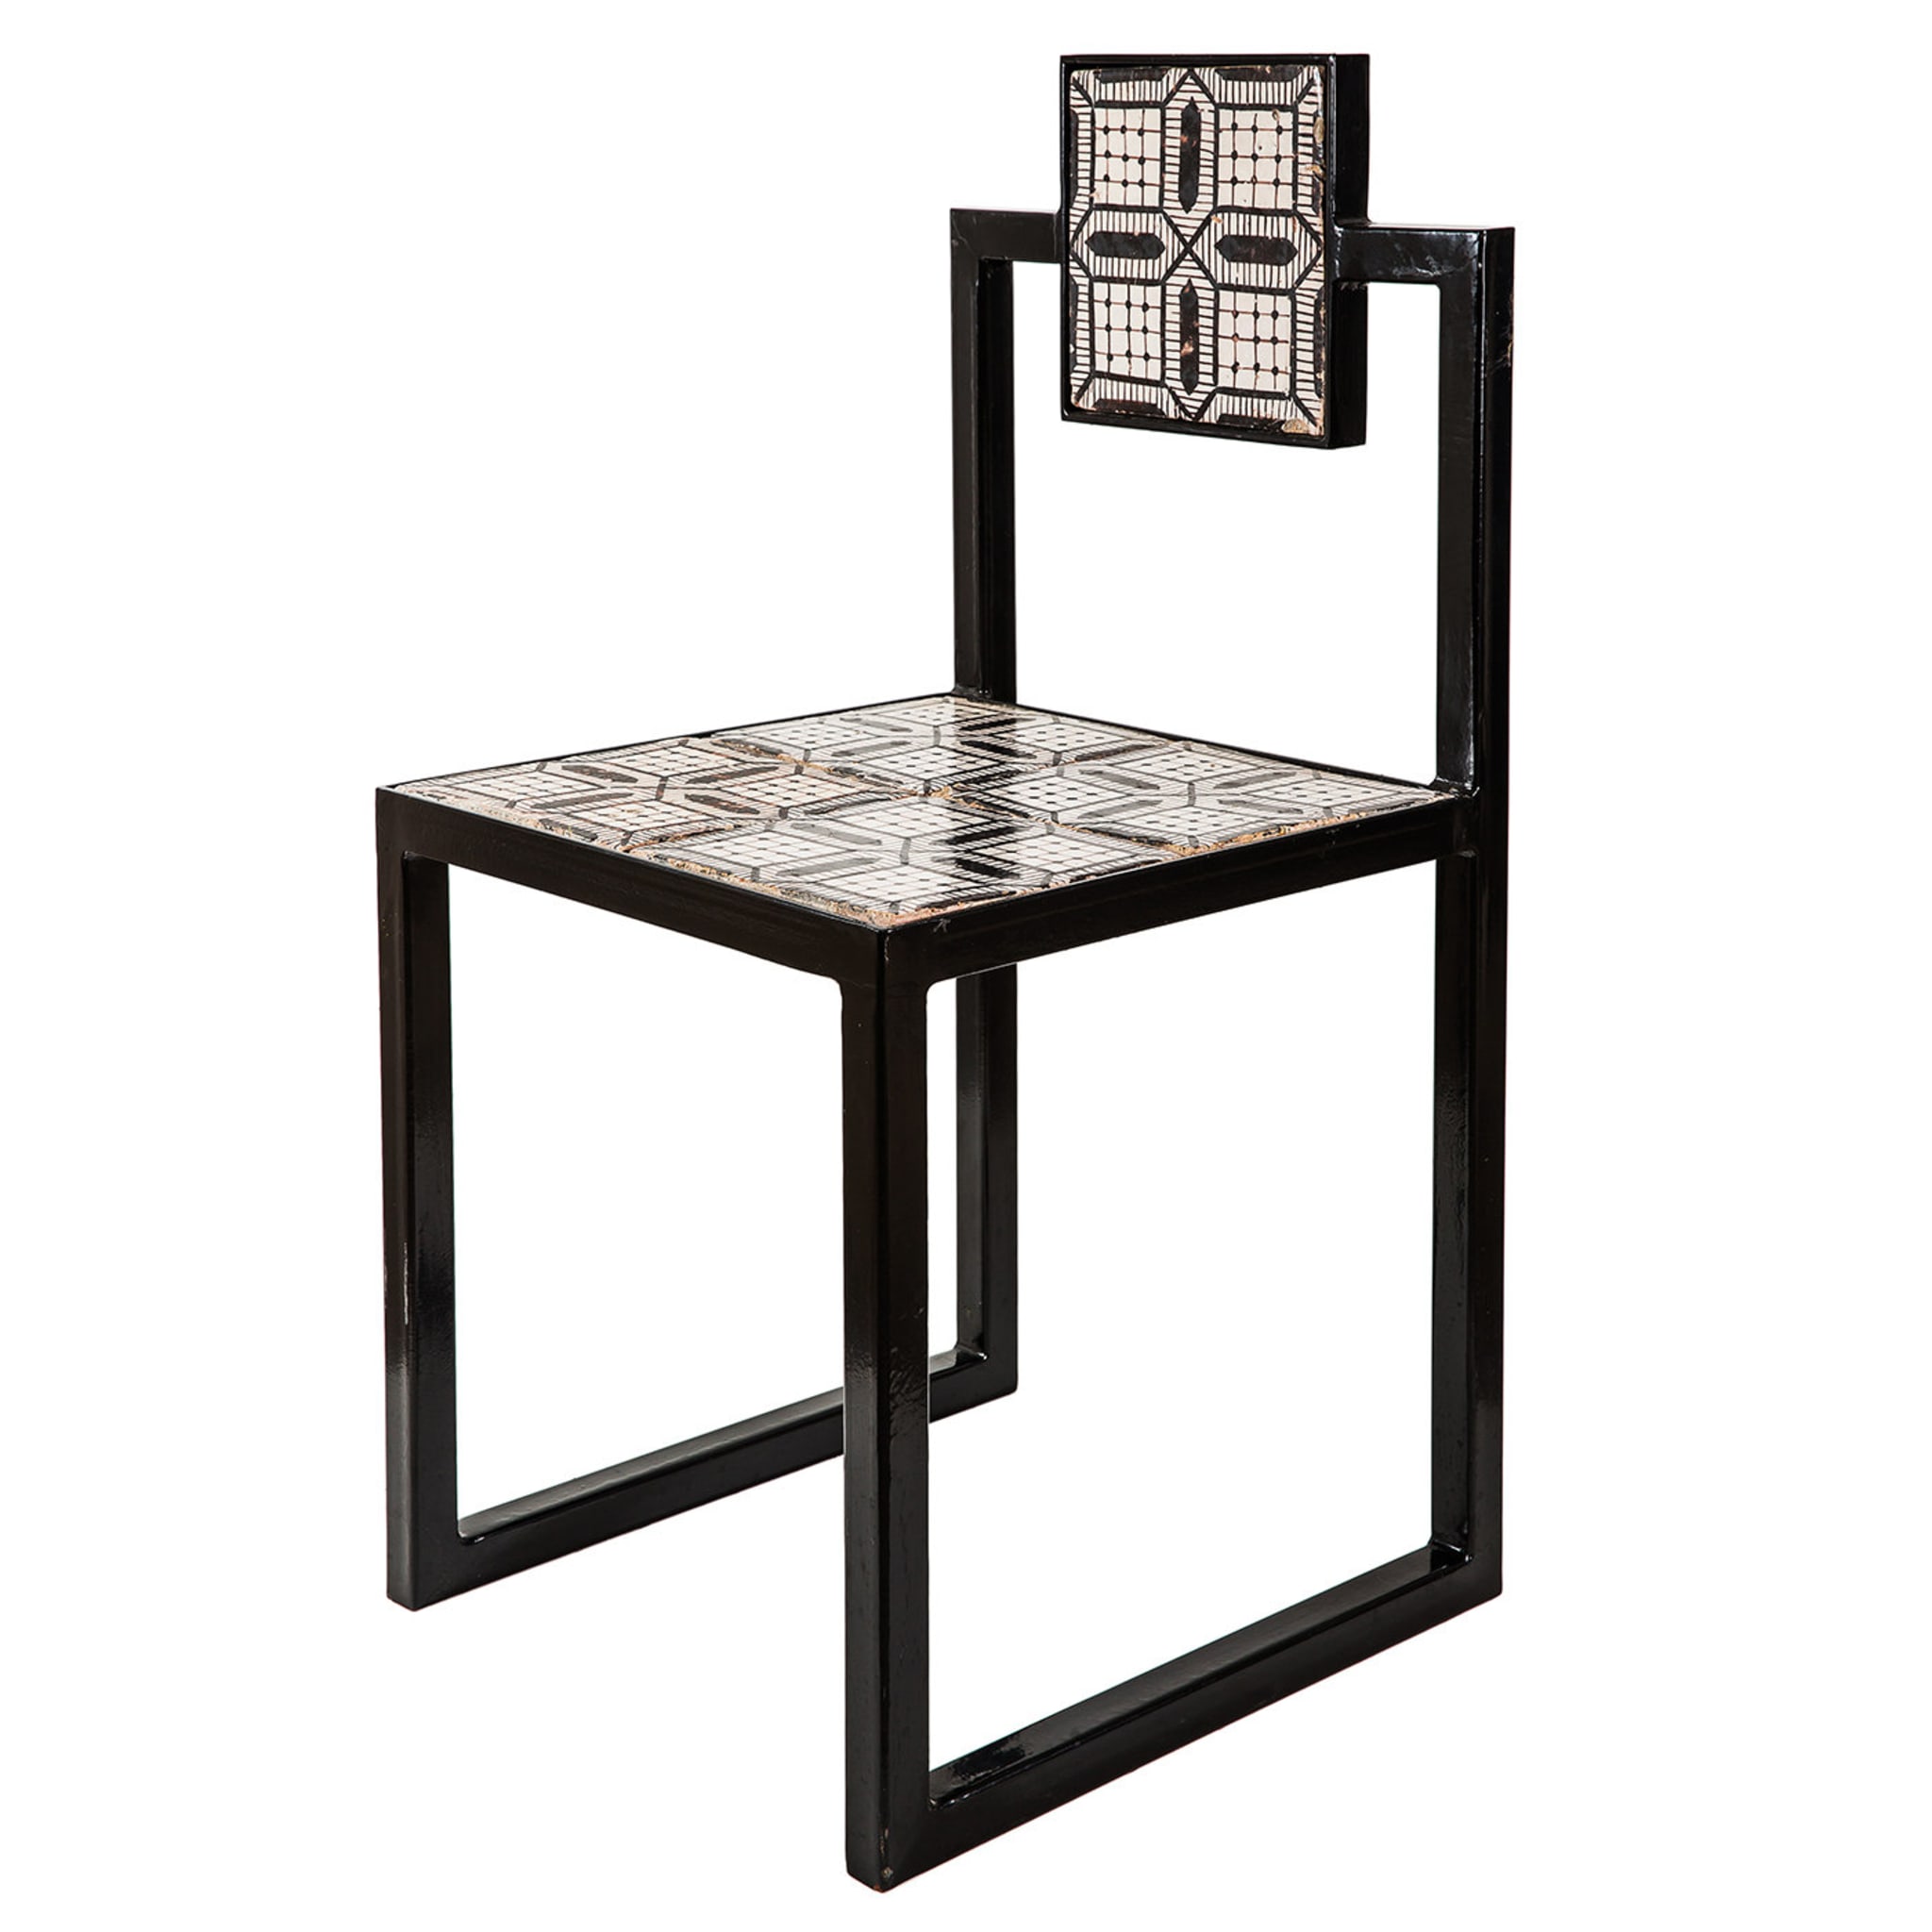 Tiles Outdoor Square Iron Chair - Alternative view 2